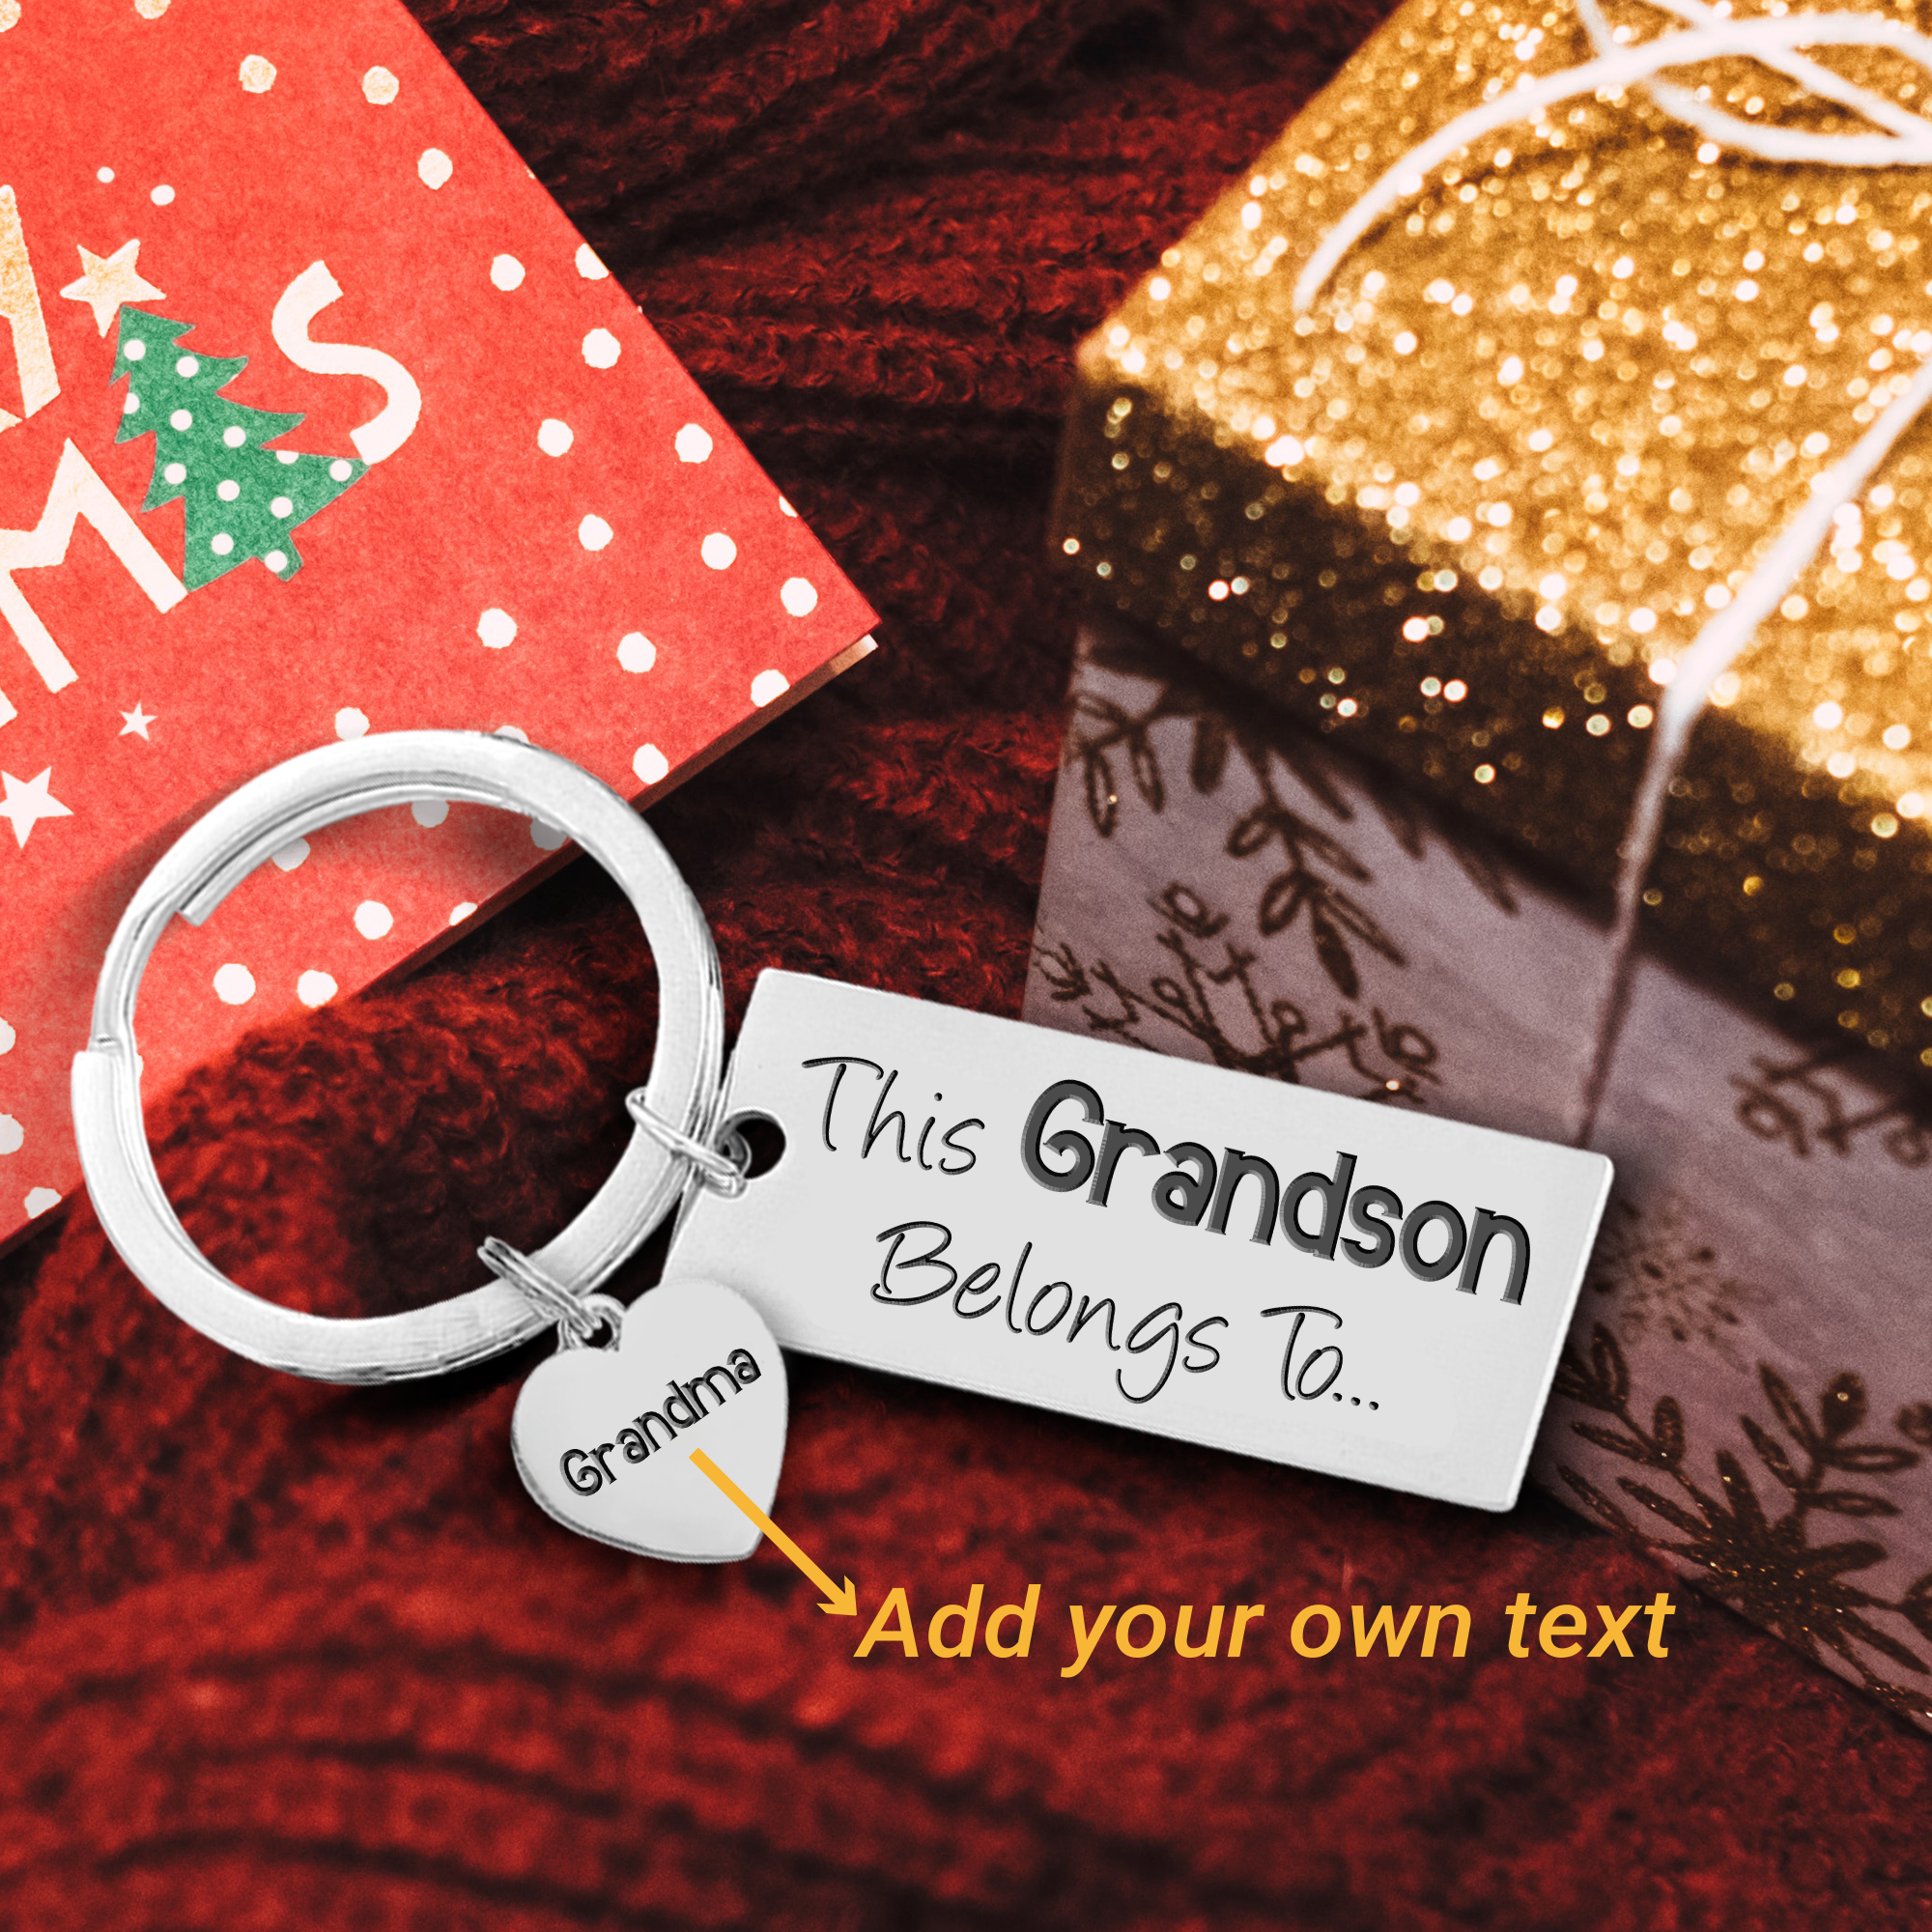 Personalized Engraved Keychain - Family - To My Grandson - I Love You - Ukgkc22001